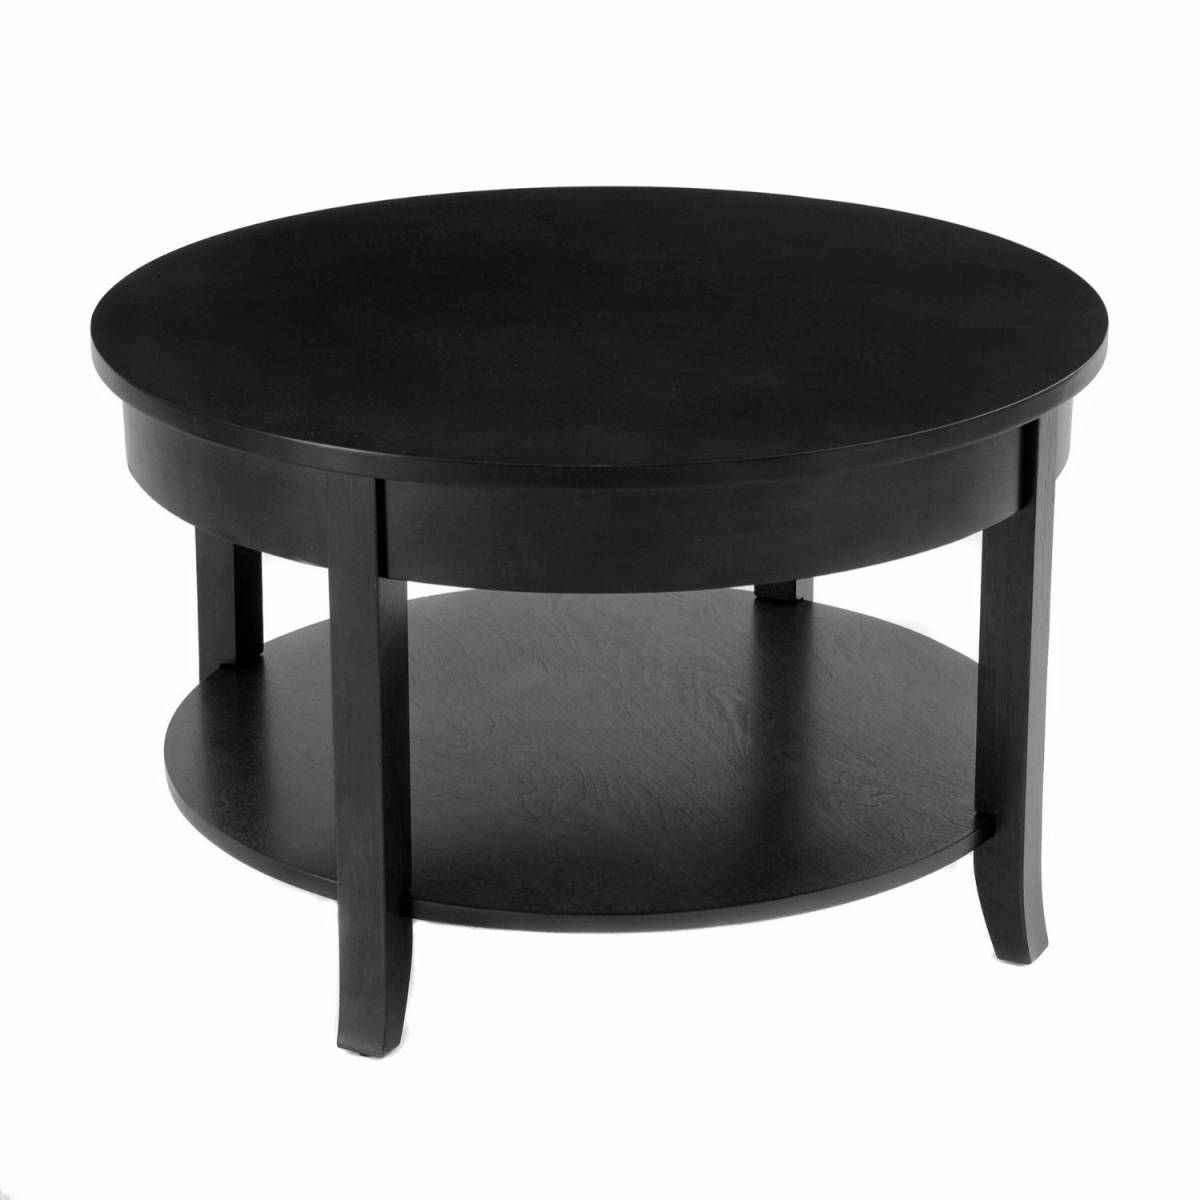 Coffee Table: Surprising Small Black Coffee Table Designs Coffee Intended For Small Coffee Tables With Shelf (View 16 of 30)